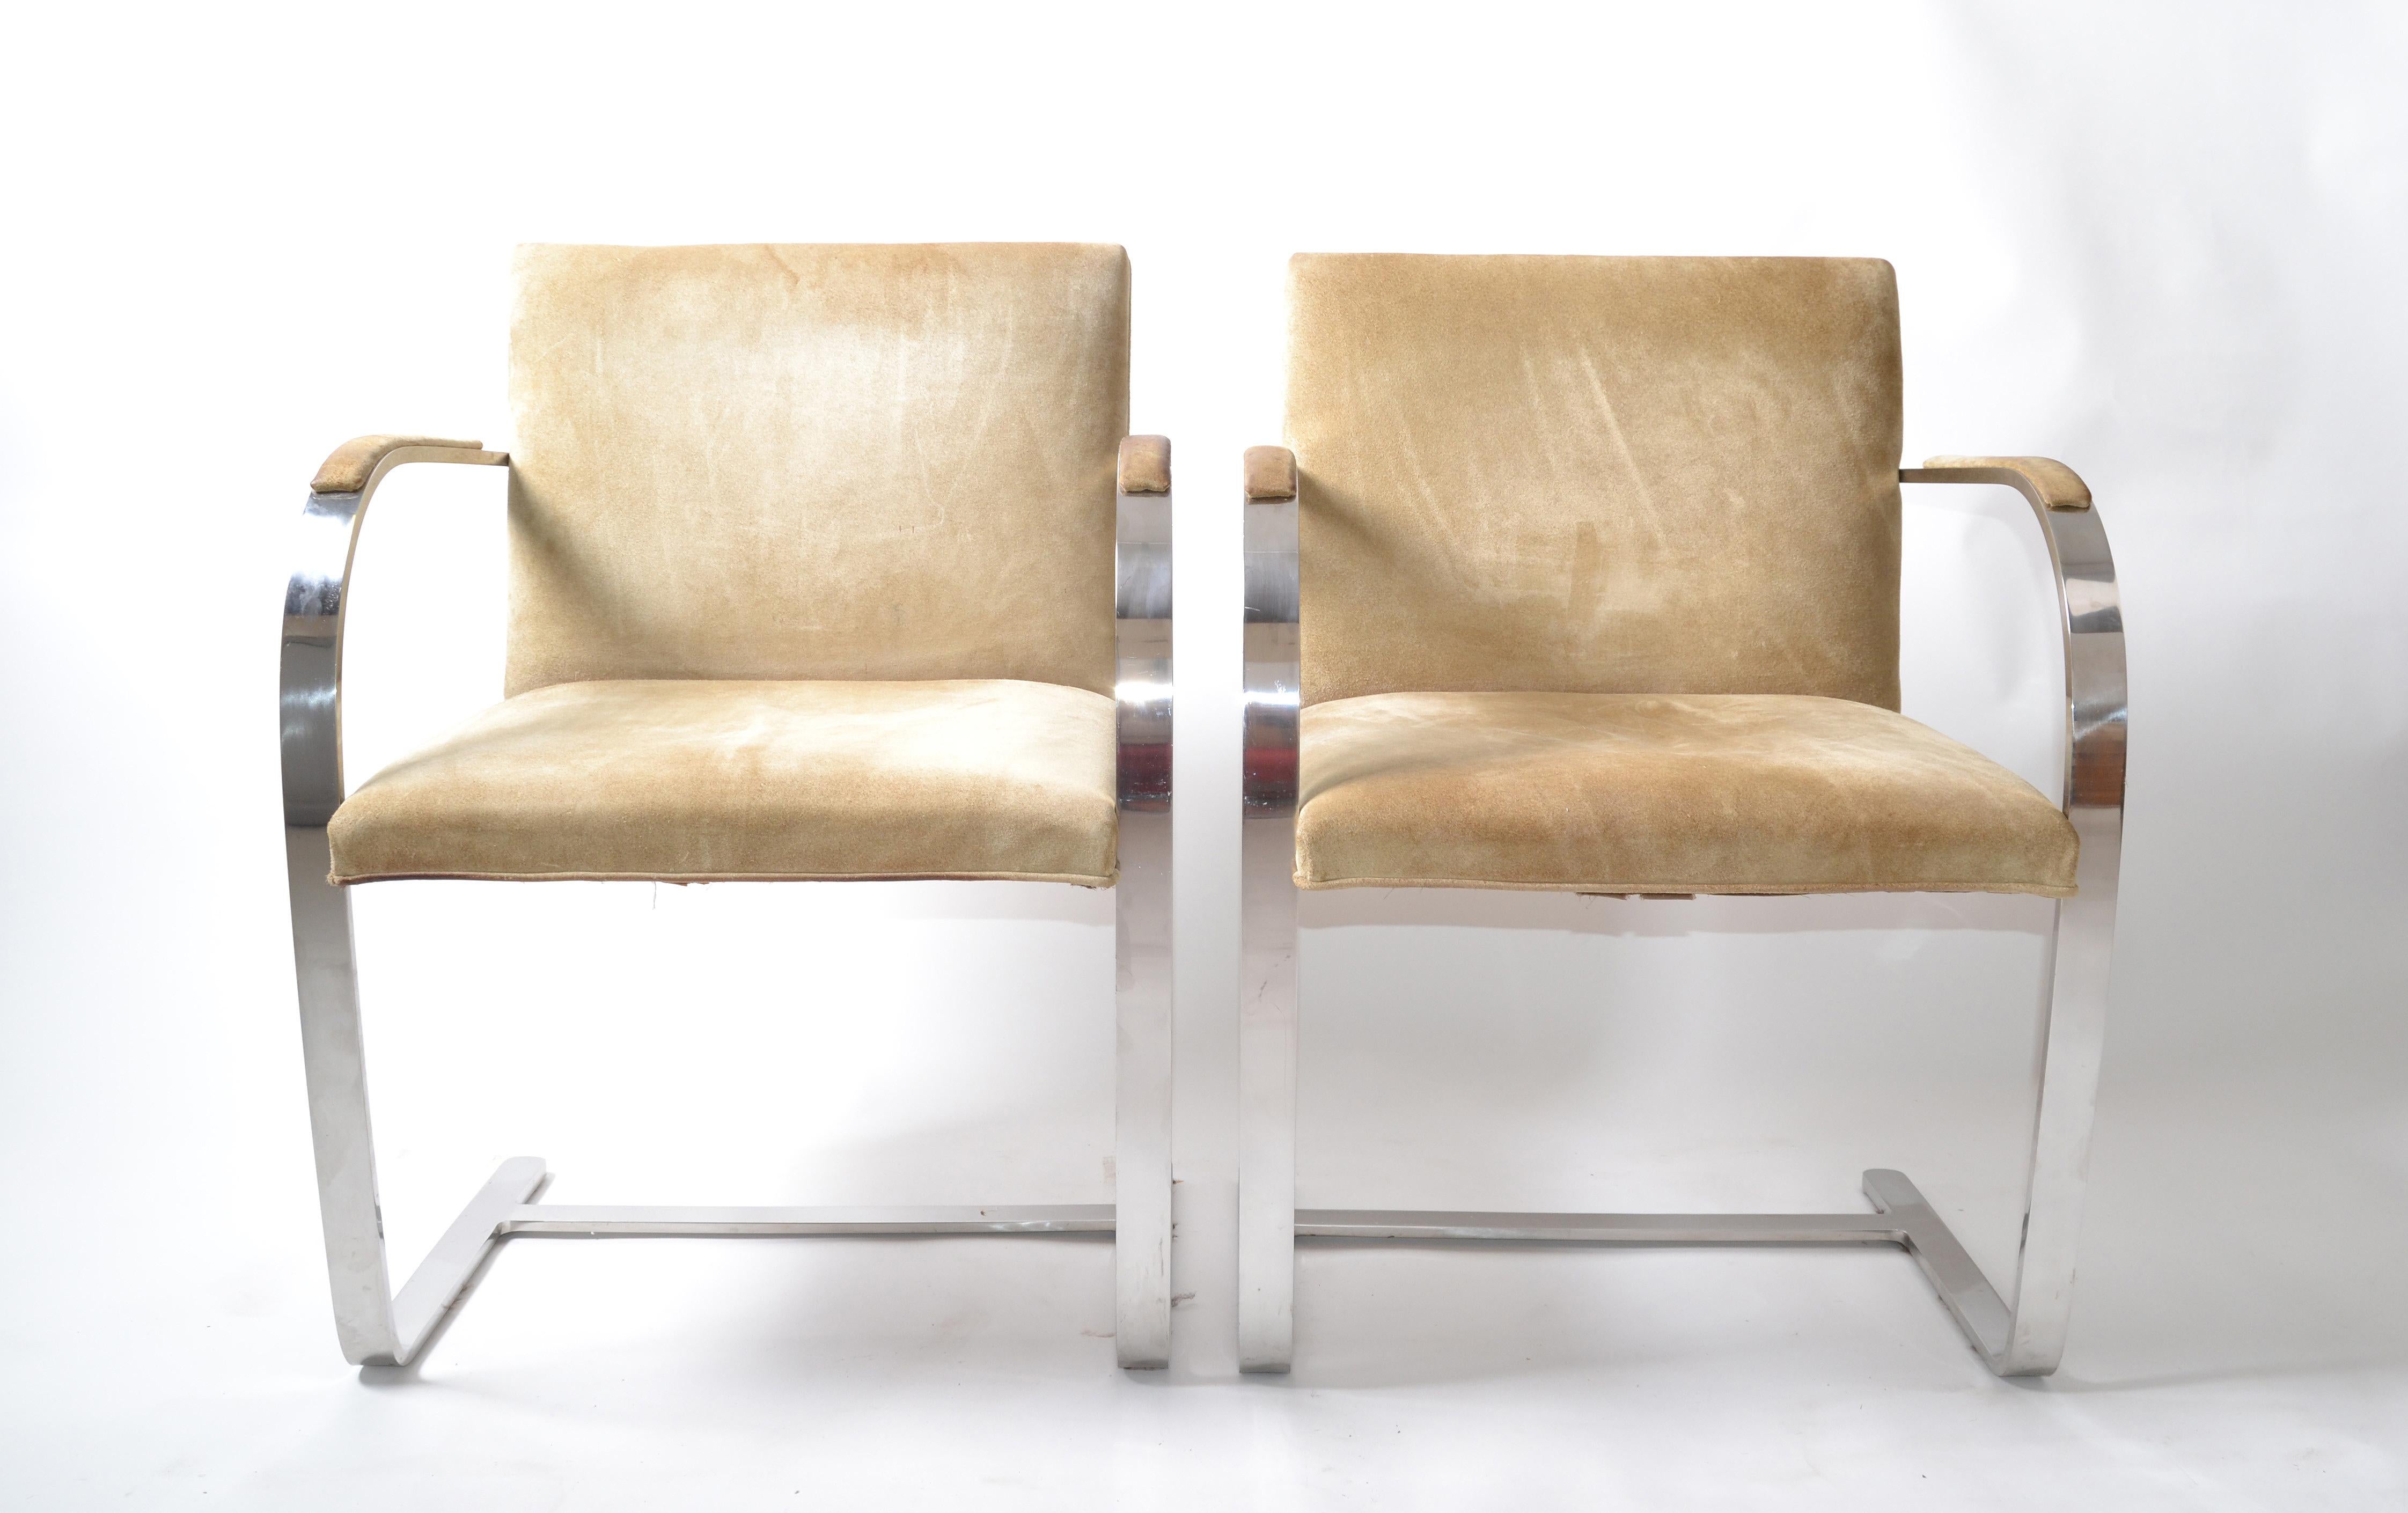 Pair of Mid-Century Modern Mies van der Rohe flatbar Brno for Knoll in stainless steel with the original Ultrasuede Upholstery and Arm pads. 
In good condition, no label but providence from Owner that the Chairs were purchased 1979. 
I also have a